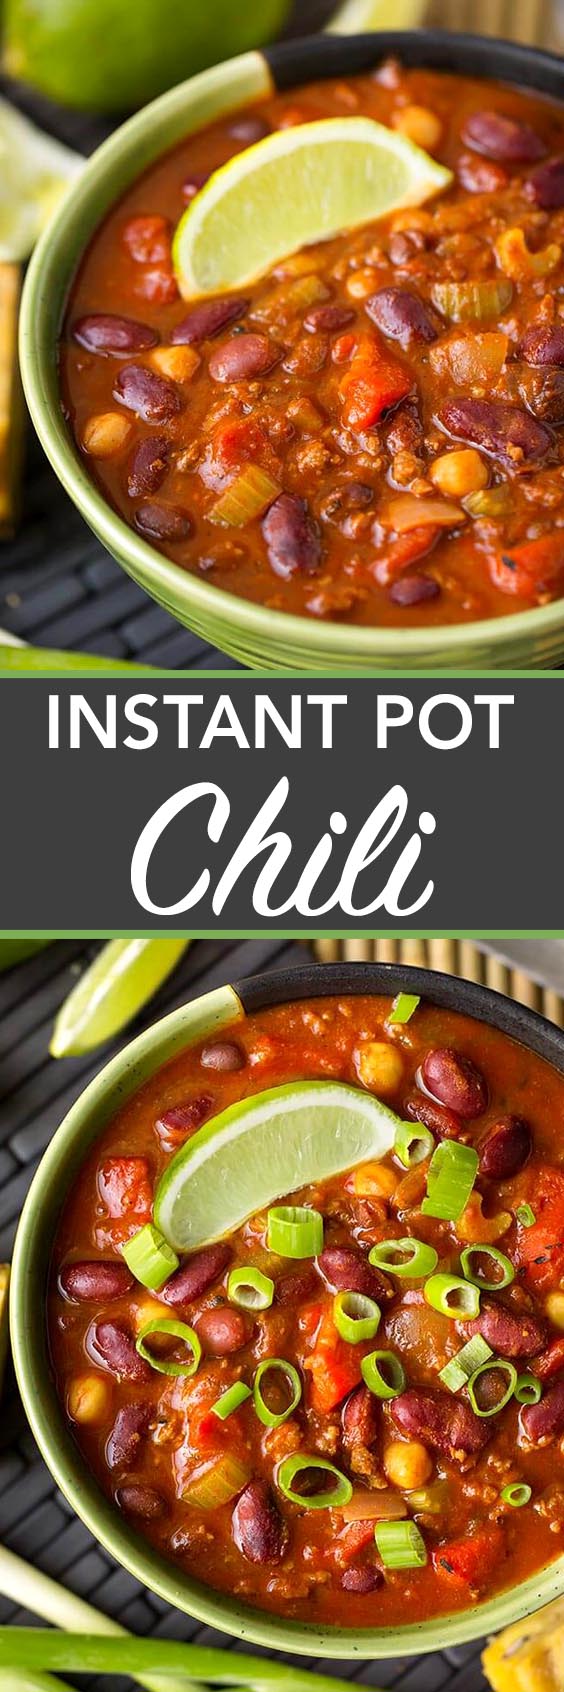 Instant Pot Chili is rich and hearty with beans and tomatoes, and lots of flavor. Pressure cooker chili is easy and fast! simplyhappyfoodie.com